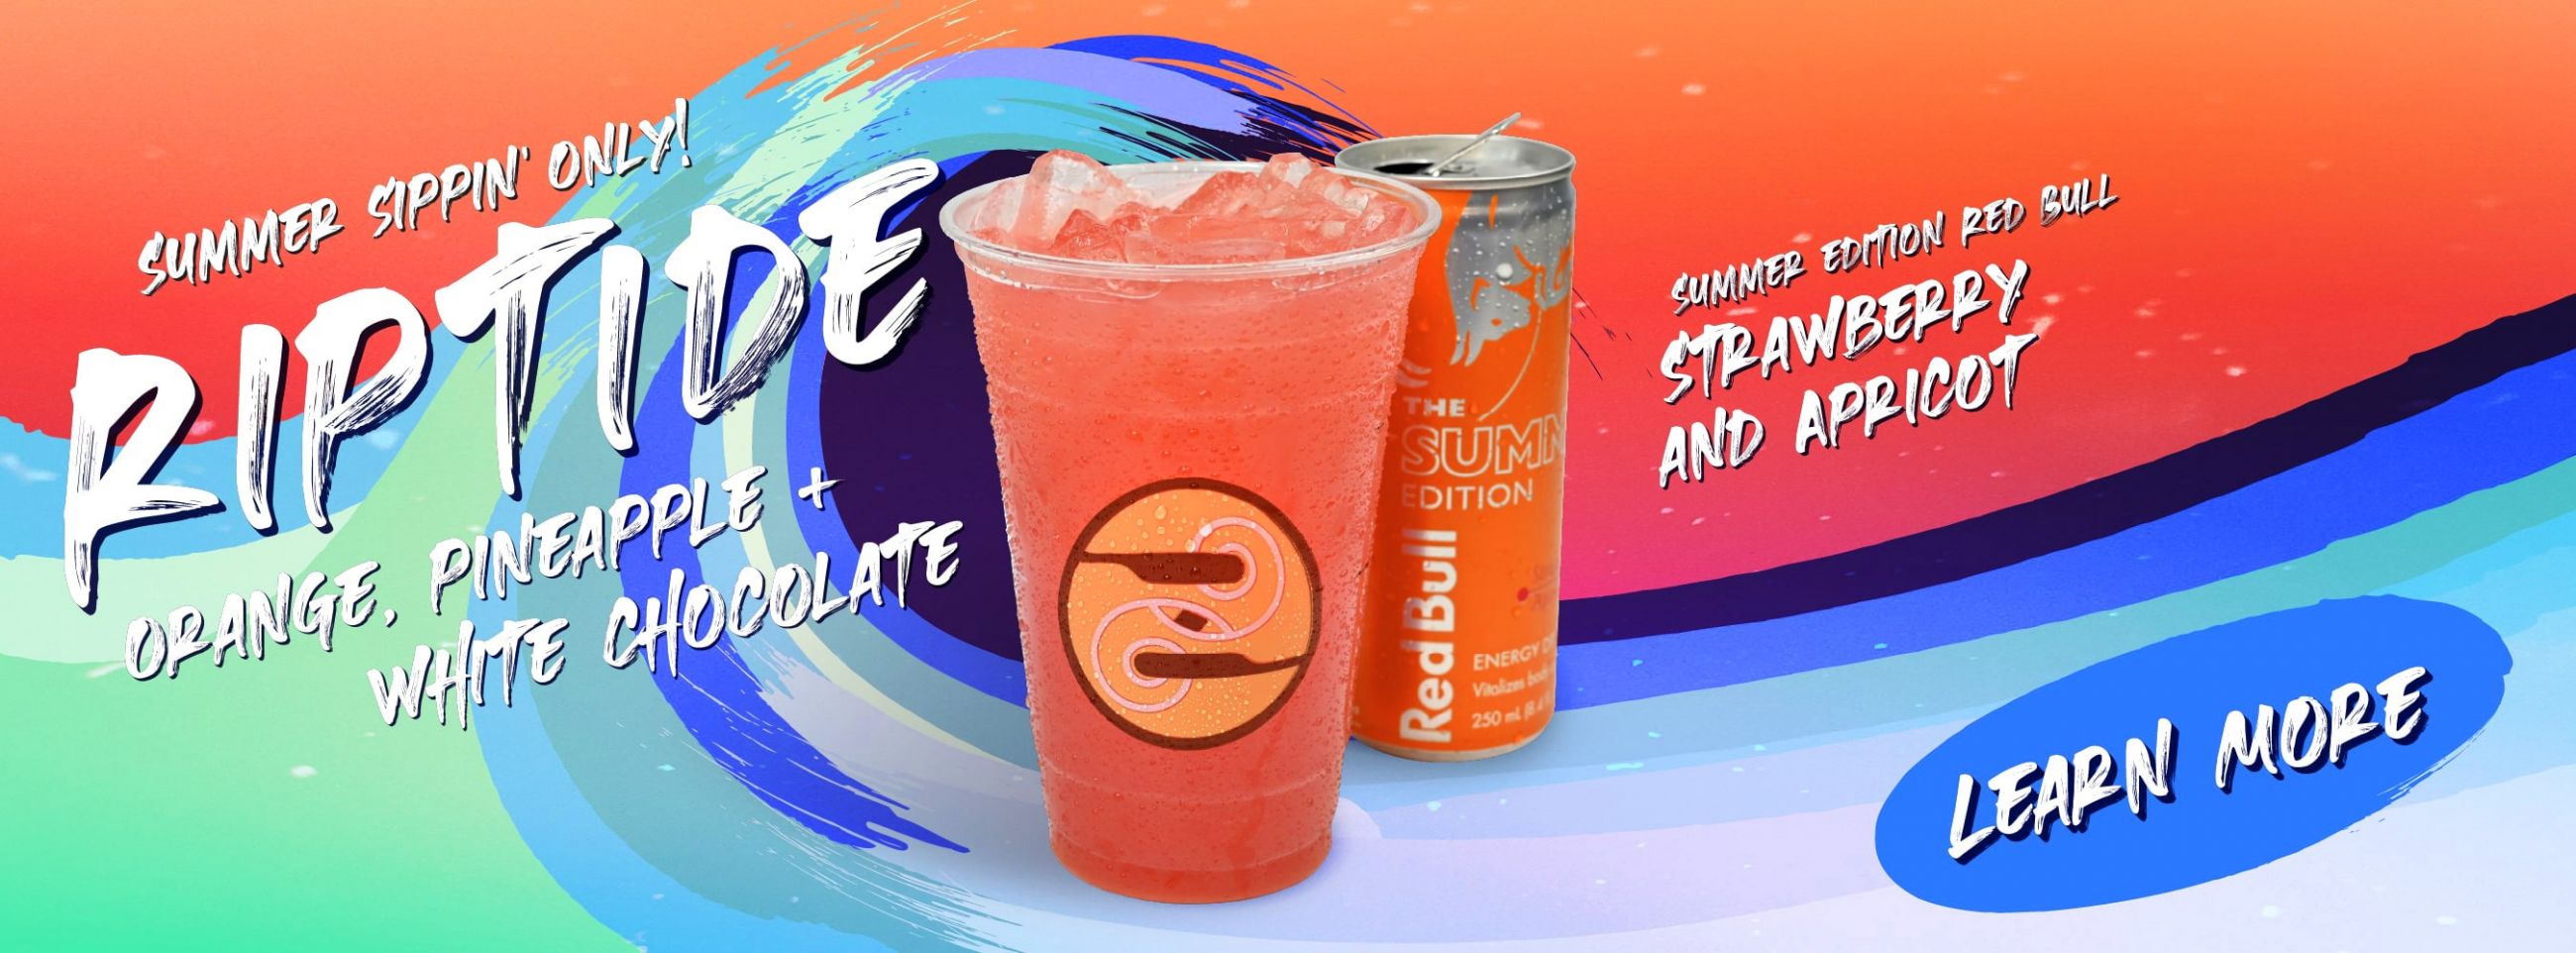 Ziggi's Coffee new limited-edition Riptide Red Bull Infusion